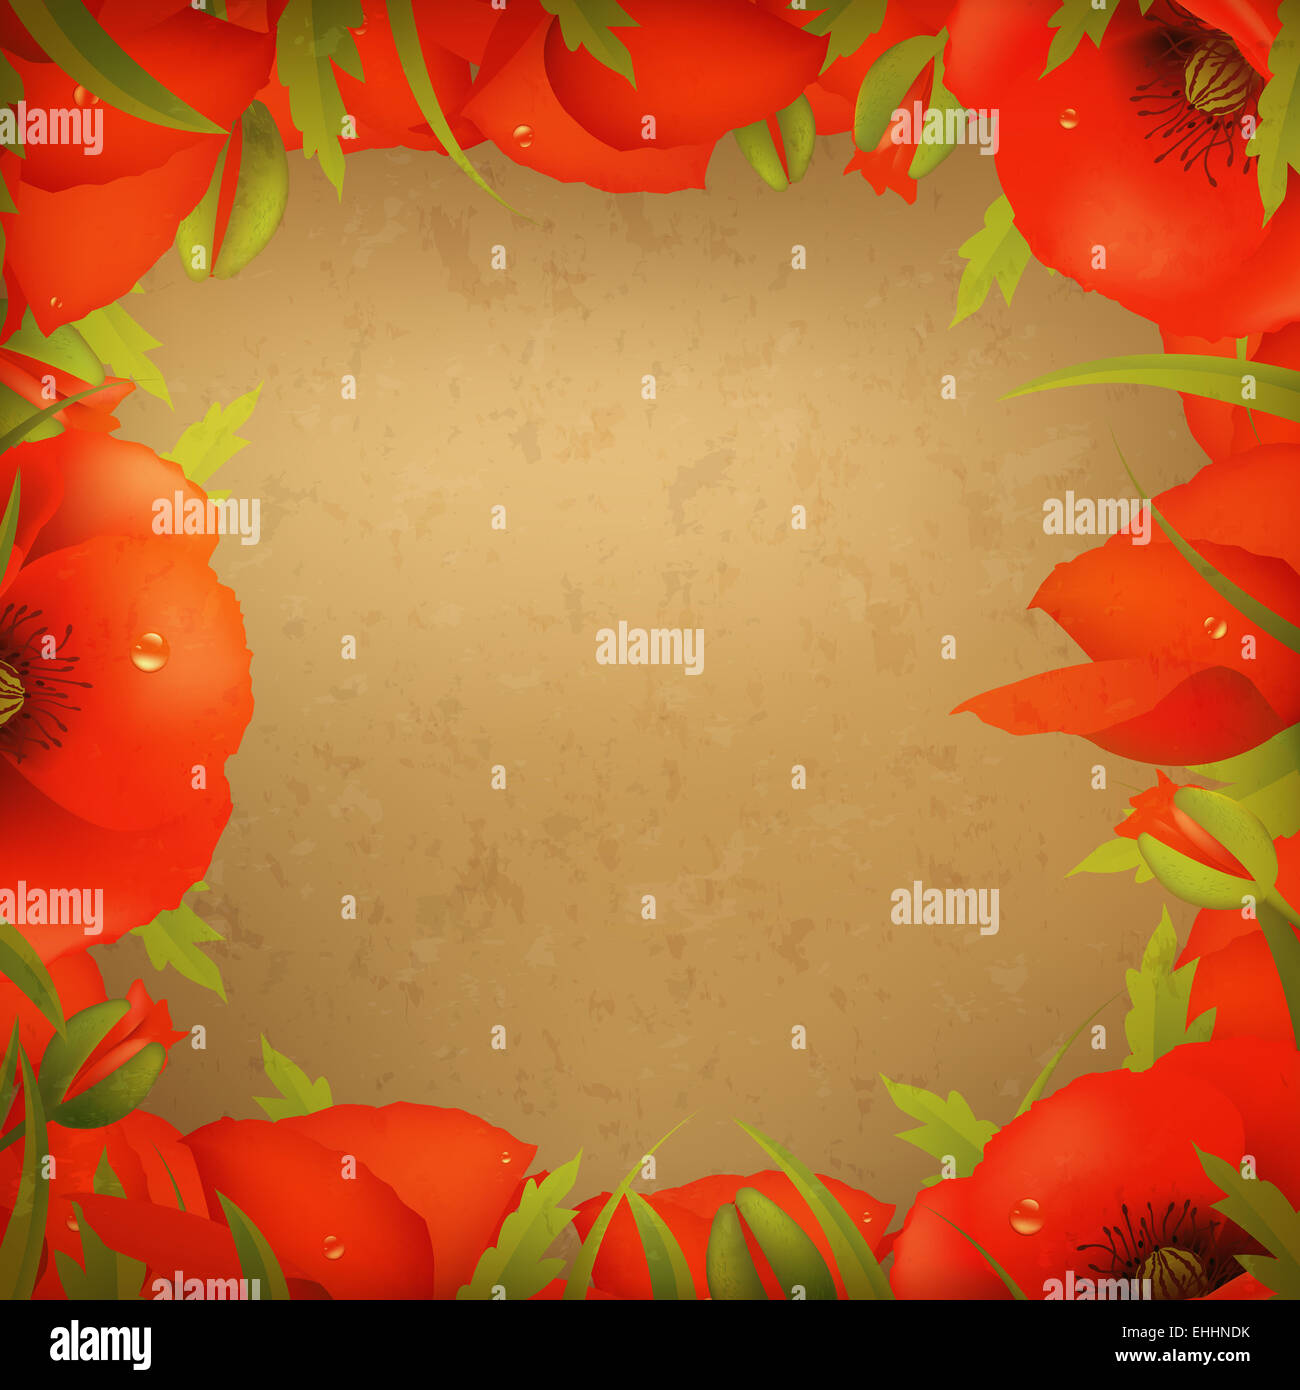 Vintage Paper And Red Poppy Stock Photo